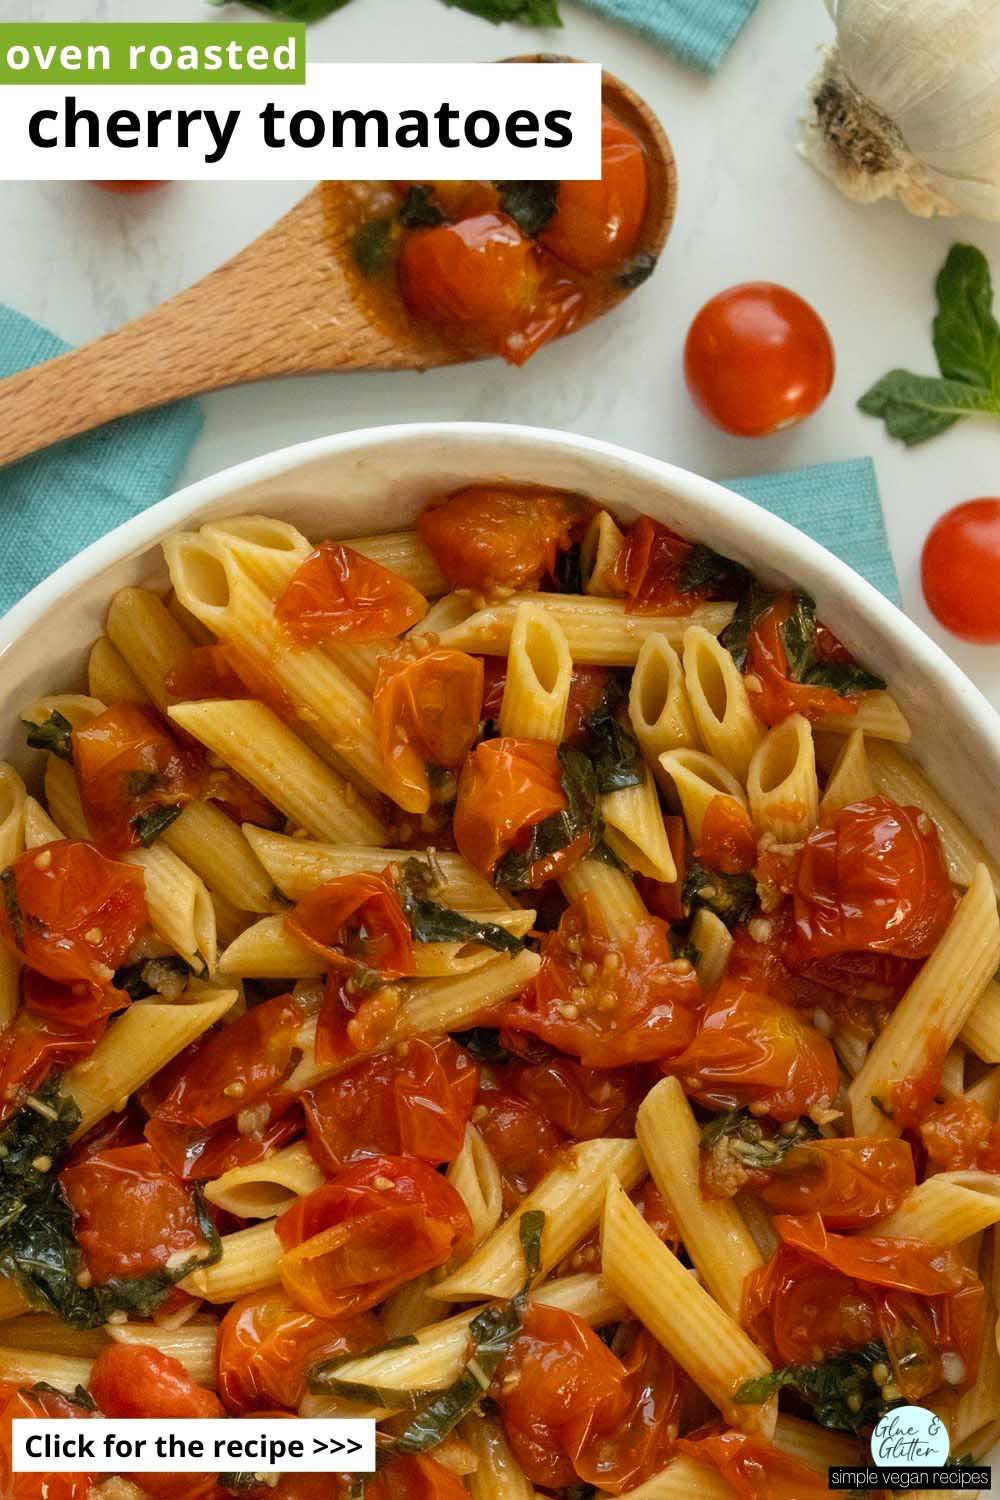 bowl of pasta with roasted cherry tomatoes, basil, and garlic, text overlay